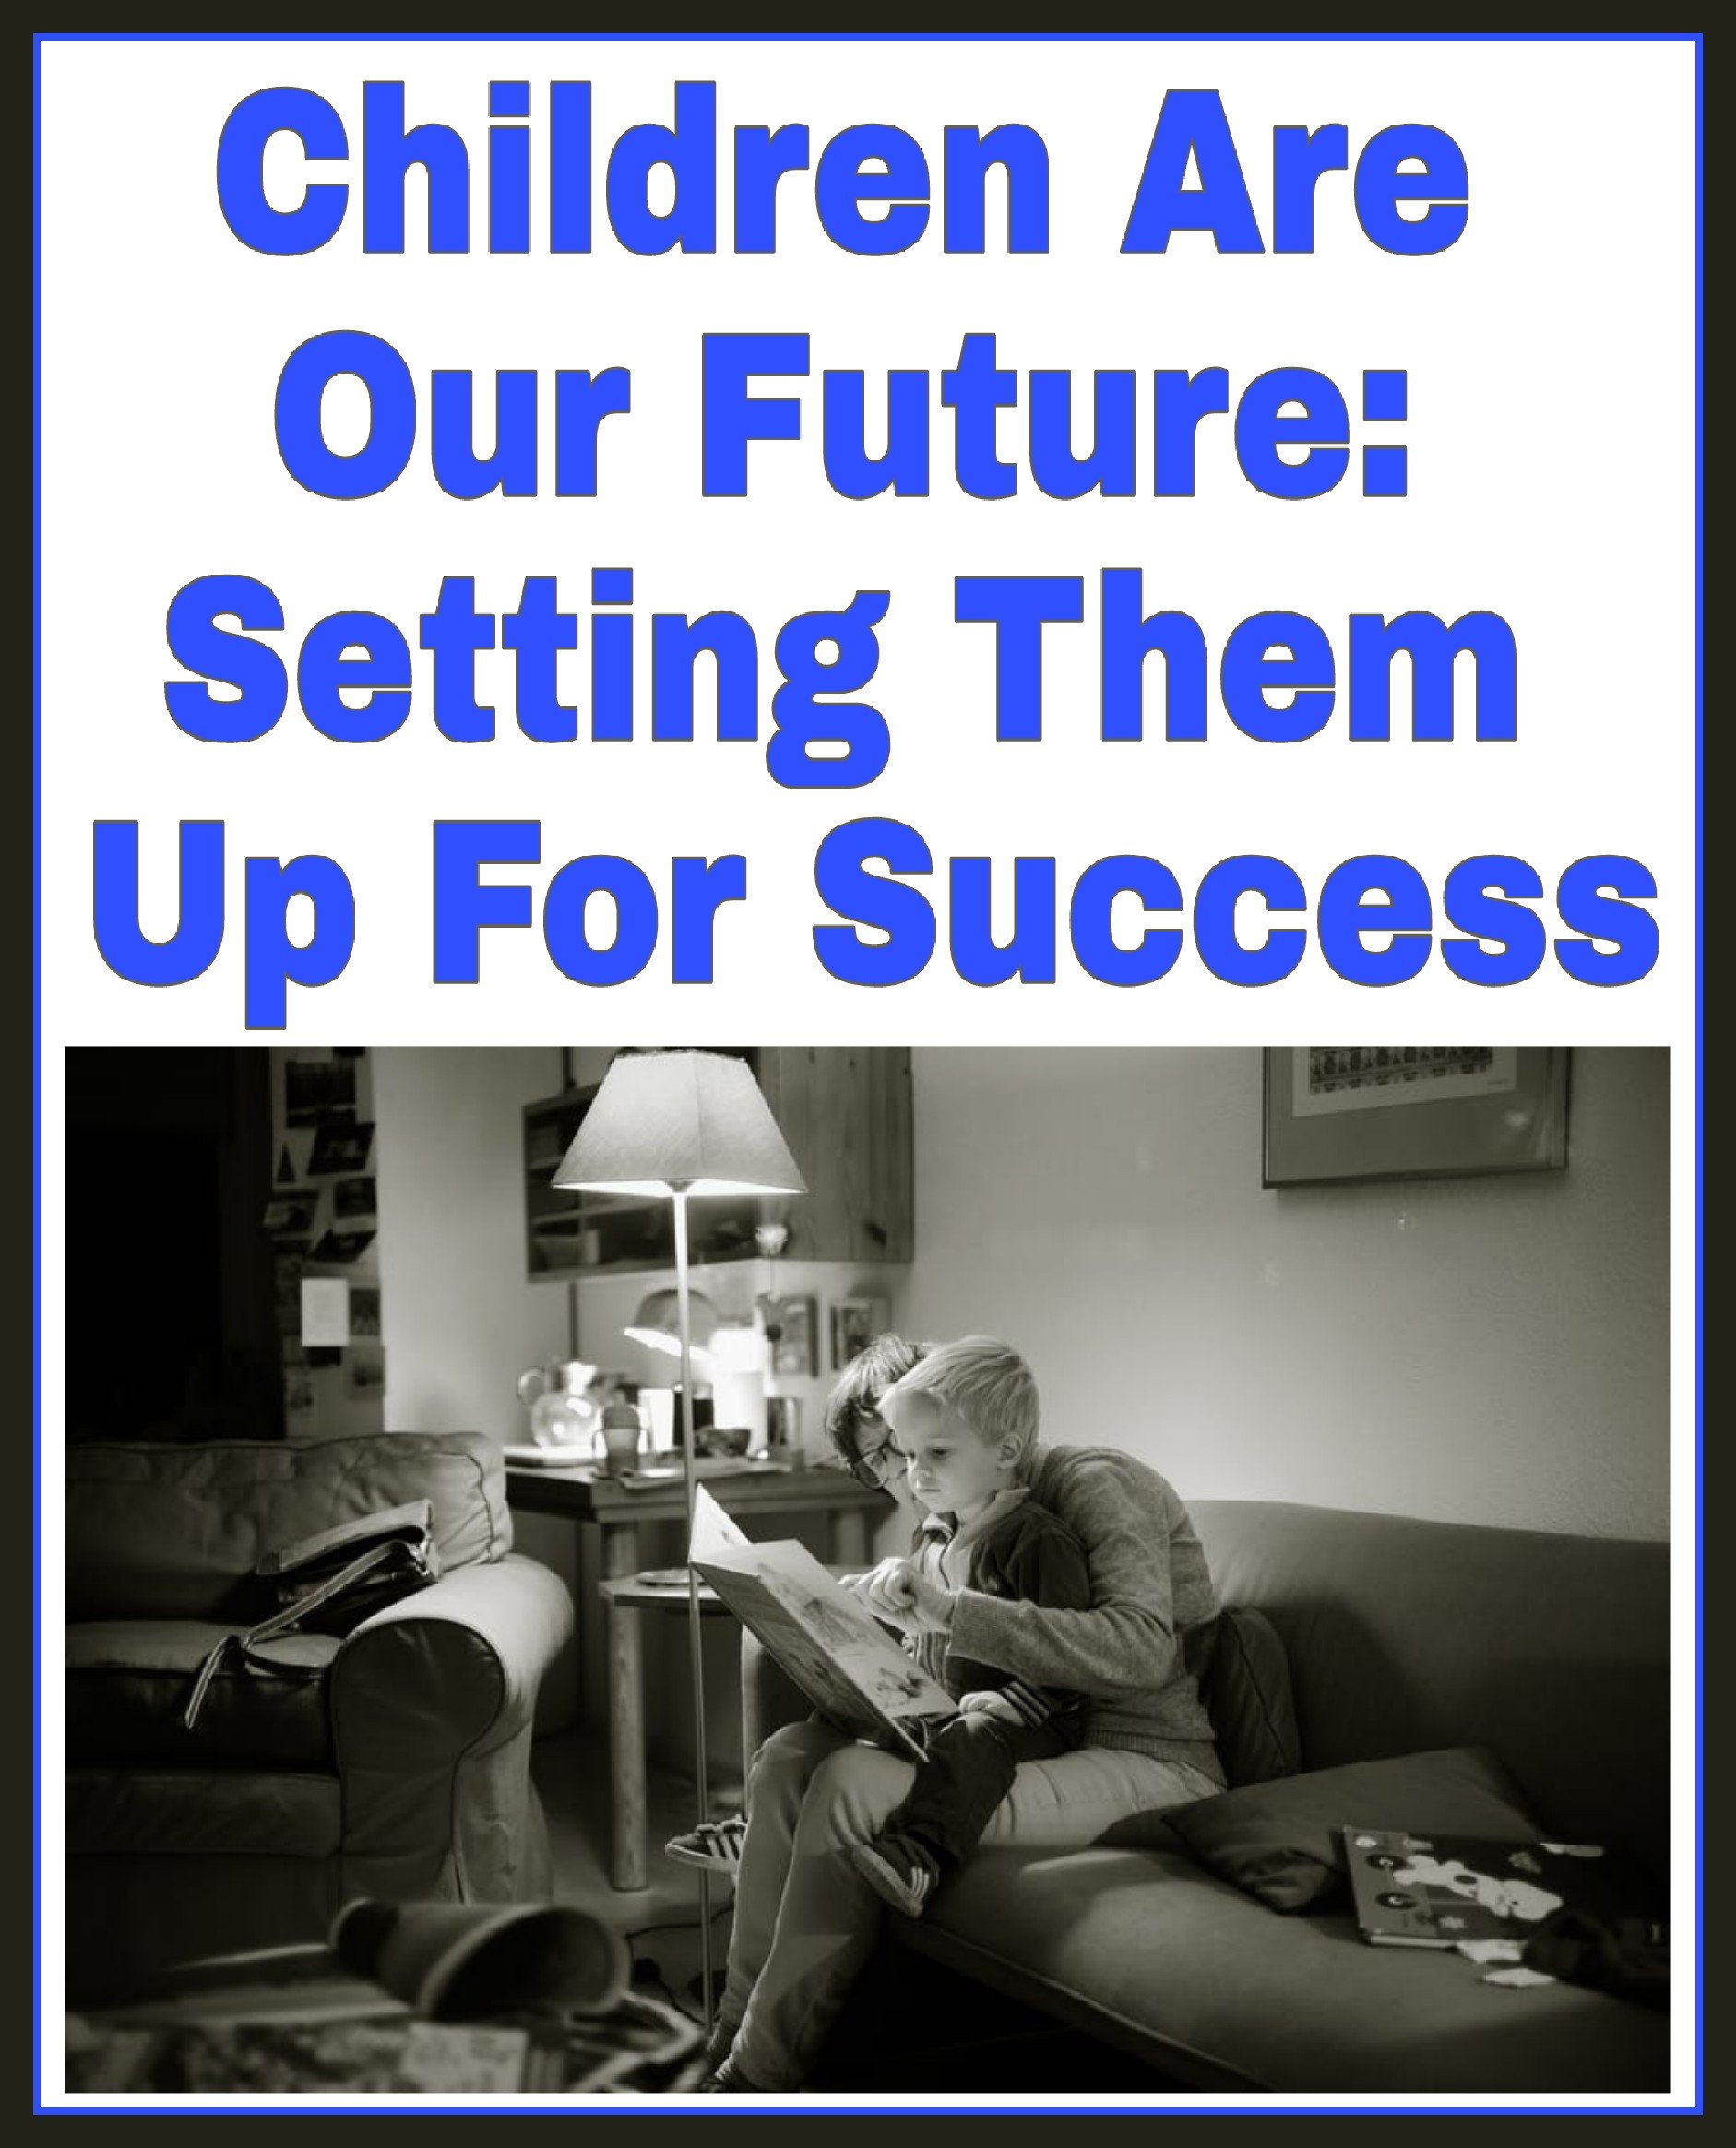 Children Are Our Future: Setting Them Up For Success title with black and white image of child sat on adult's knee in a living room reading a book.